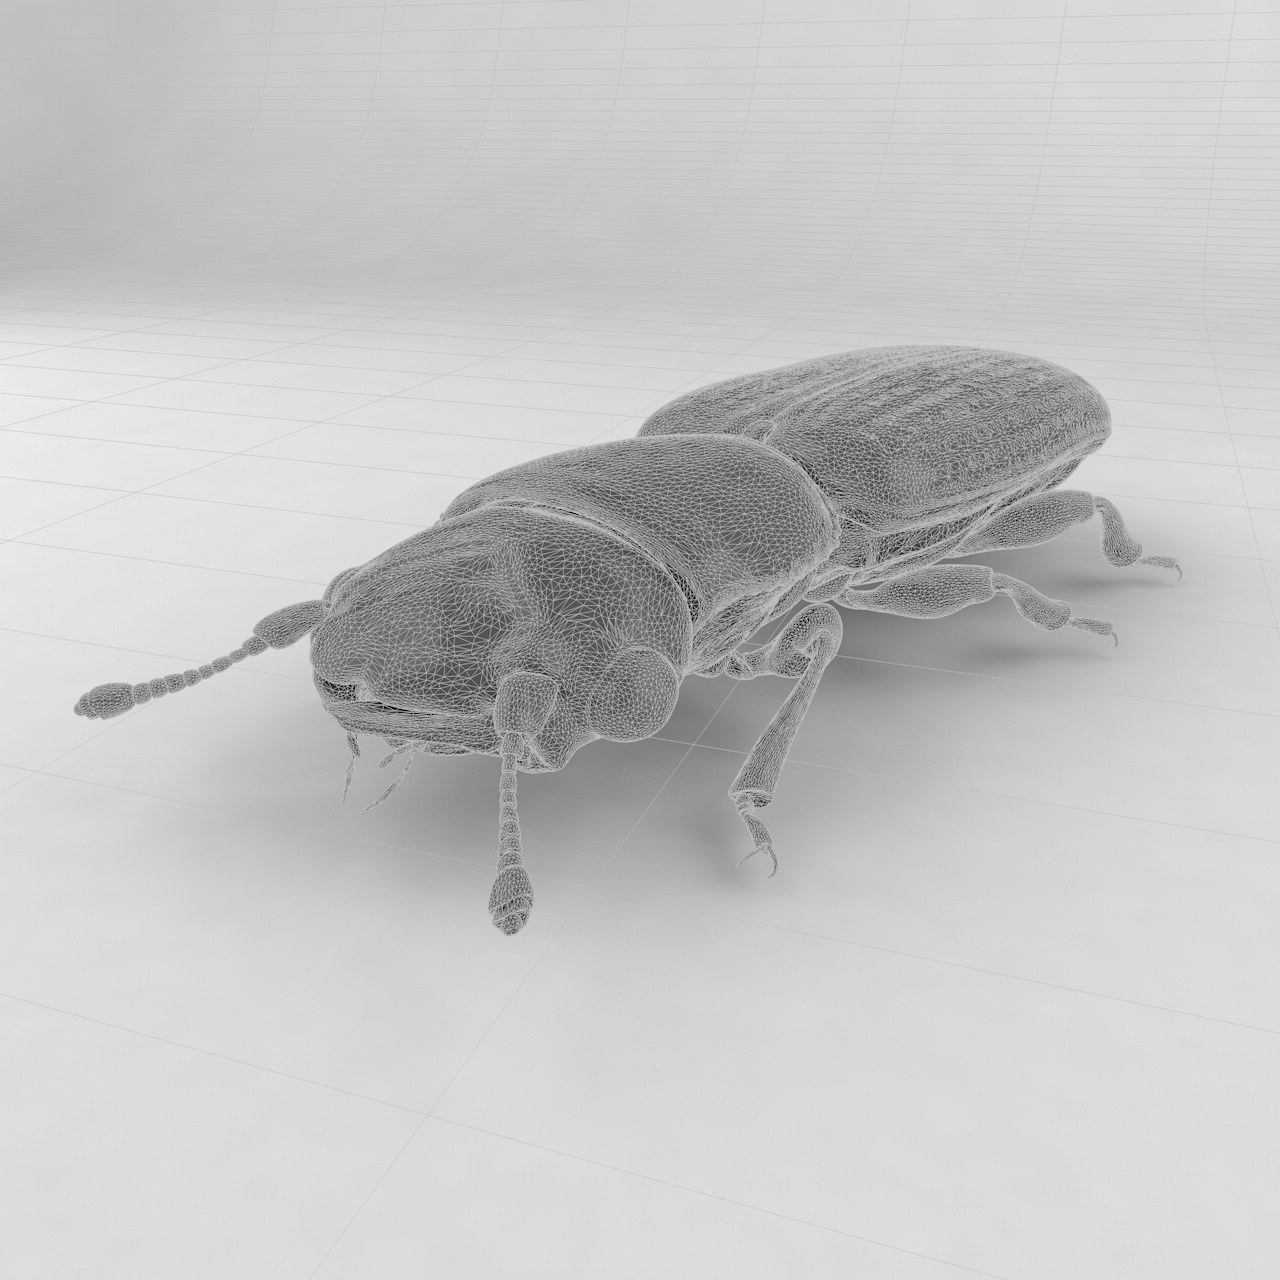 Monotomidae insect beetles 3d model